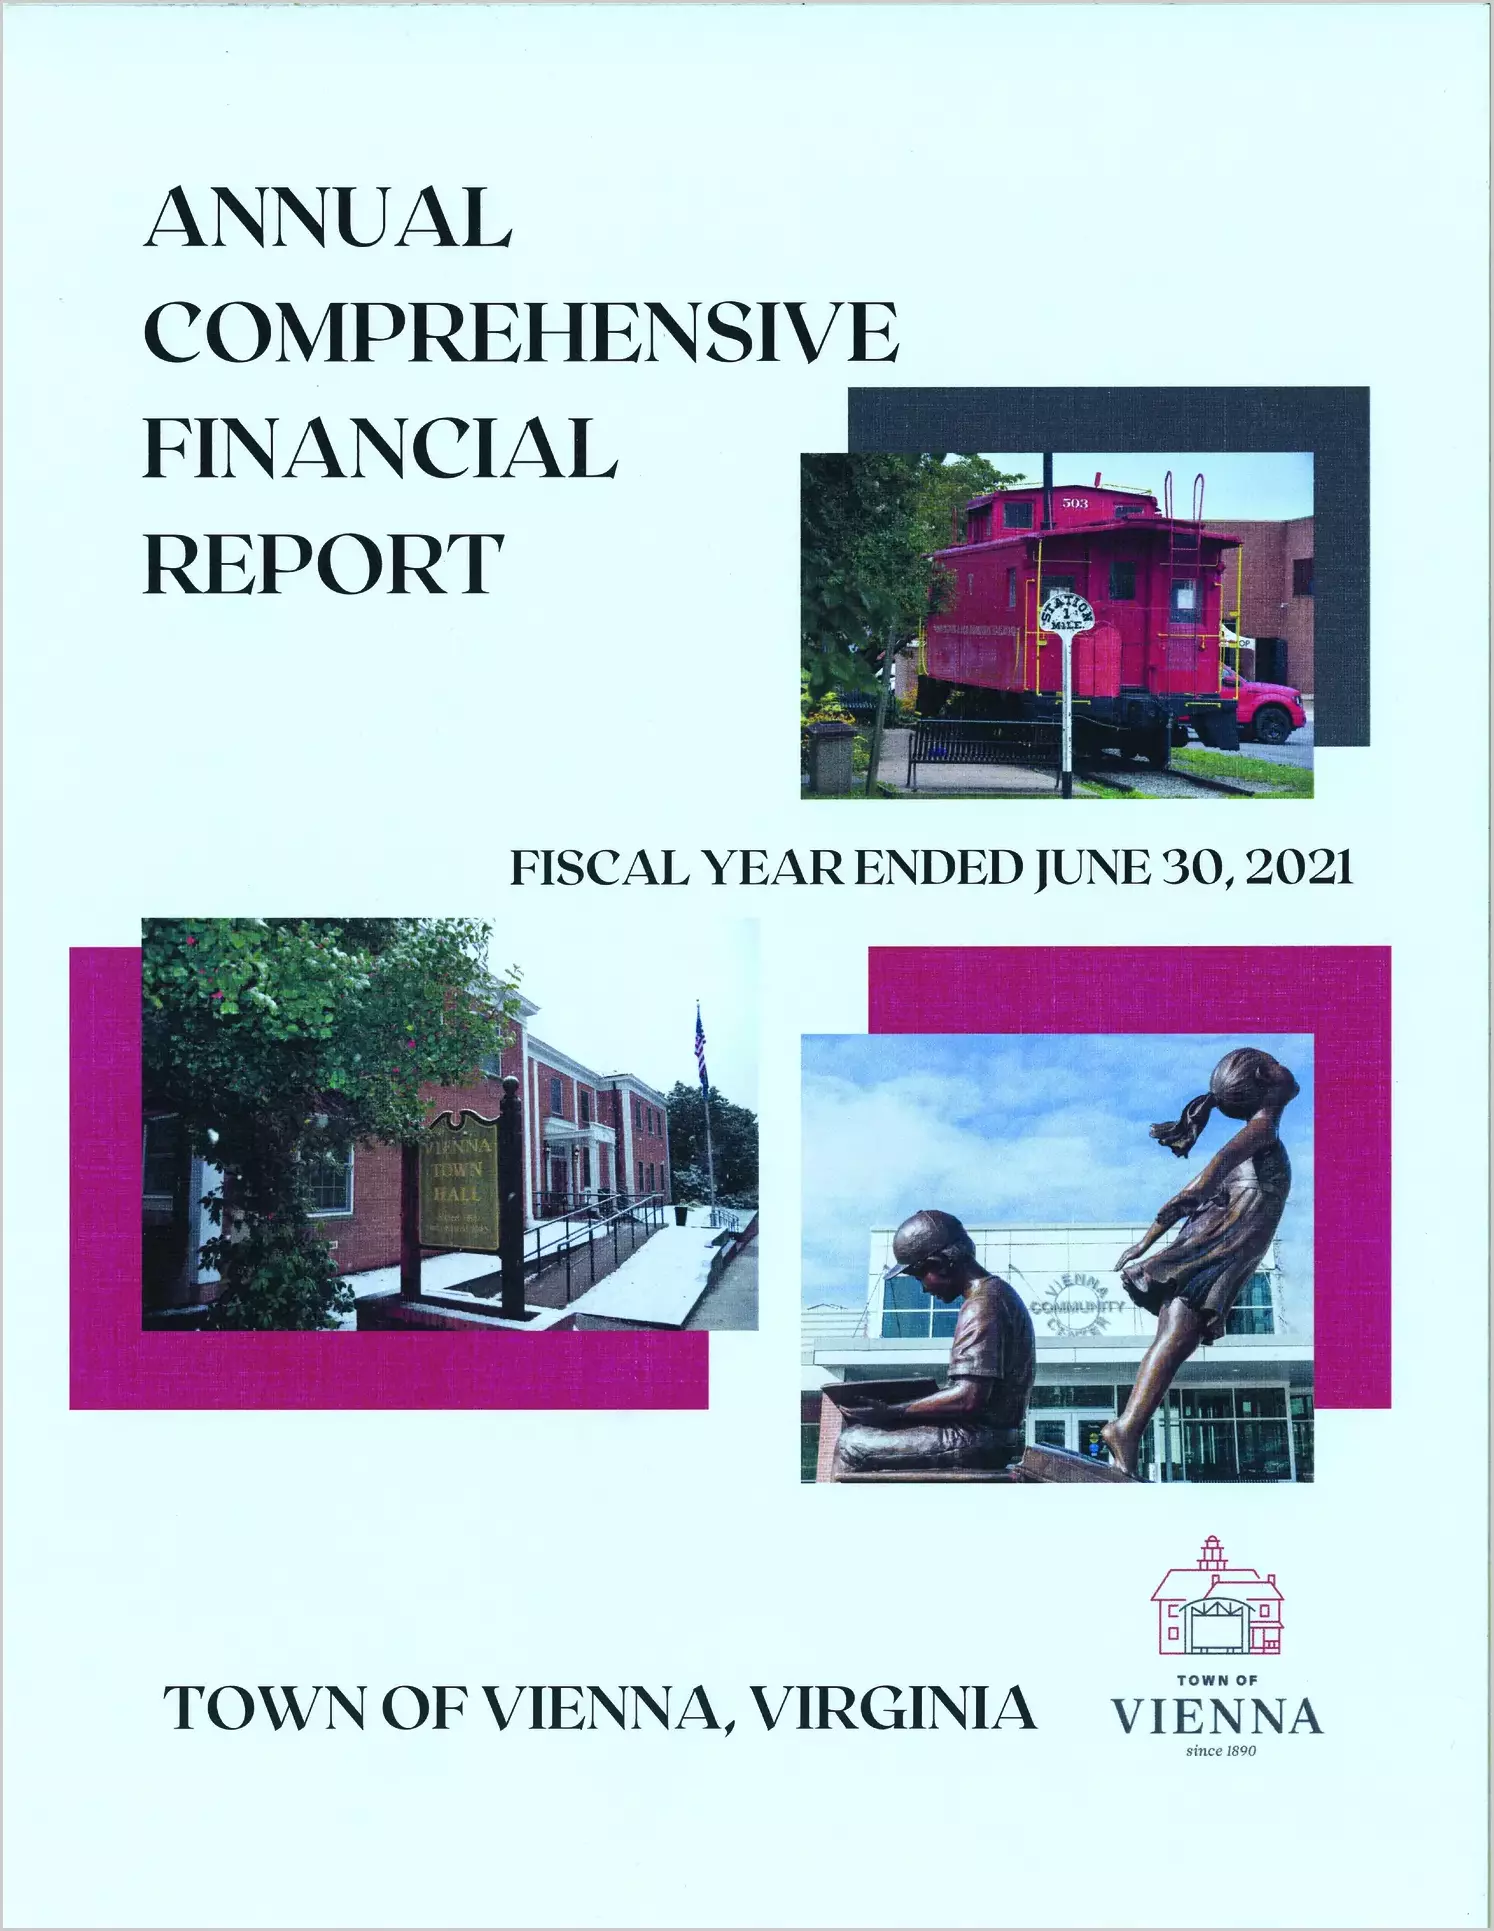 2021 Annual Financial Report for Town of Vienna